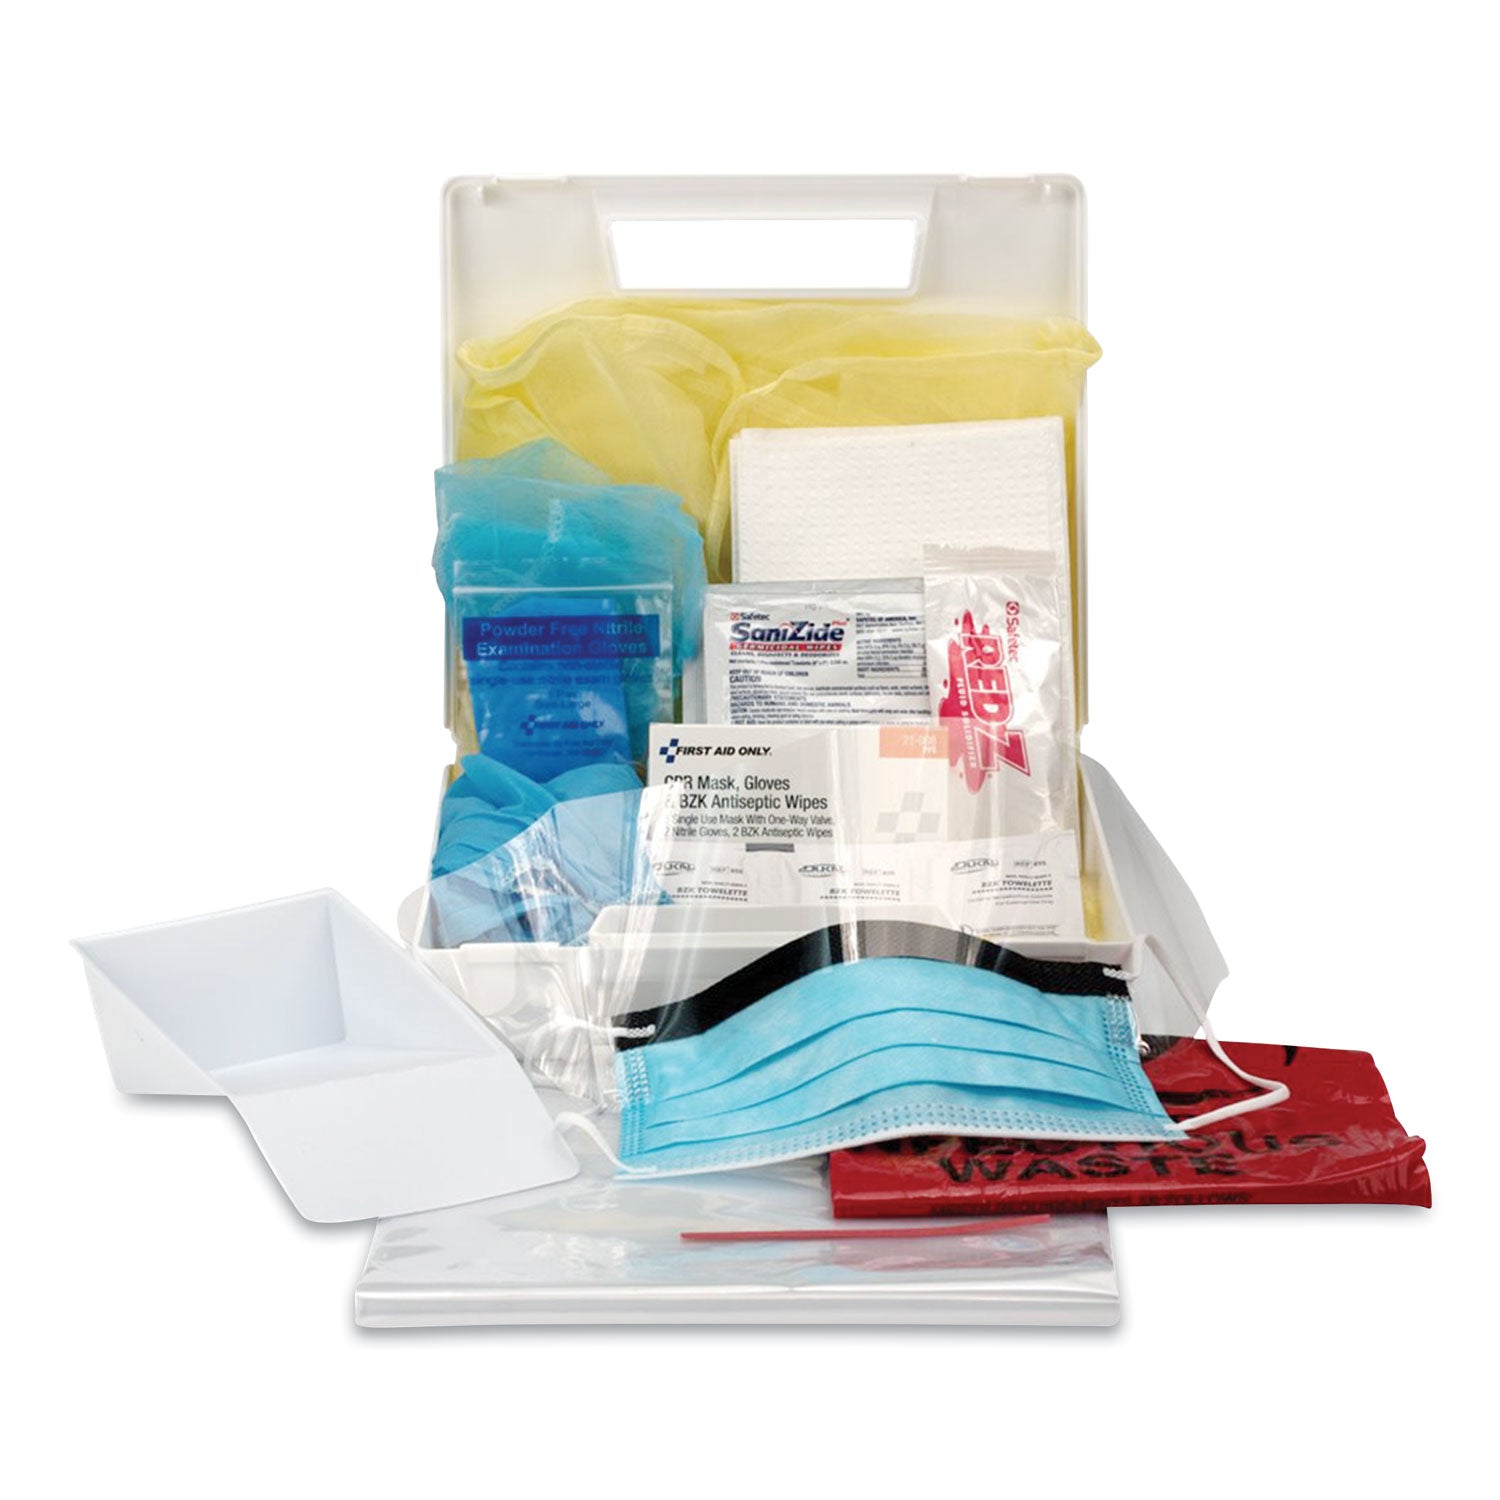 bloodborne-pathogen-spill-clean-up-kit-with-cpr-pack-31-pieces-plastic-case_fao216o - 1